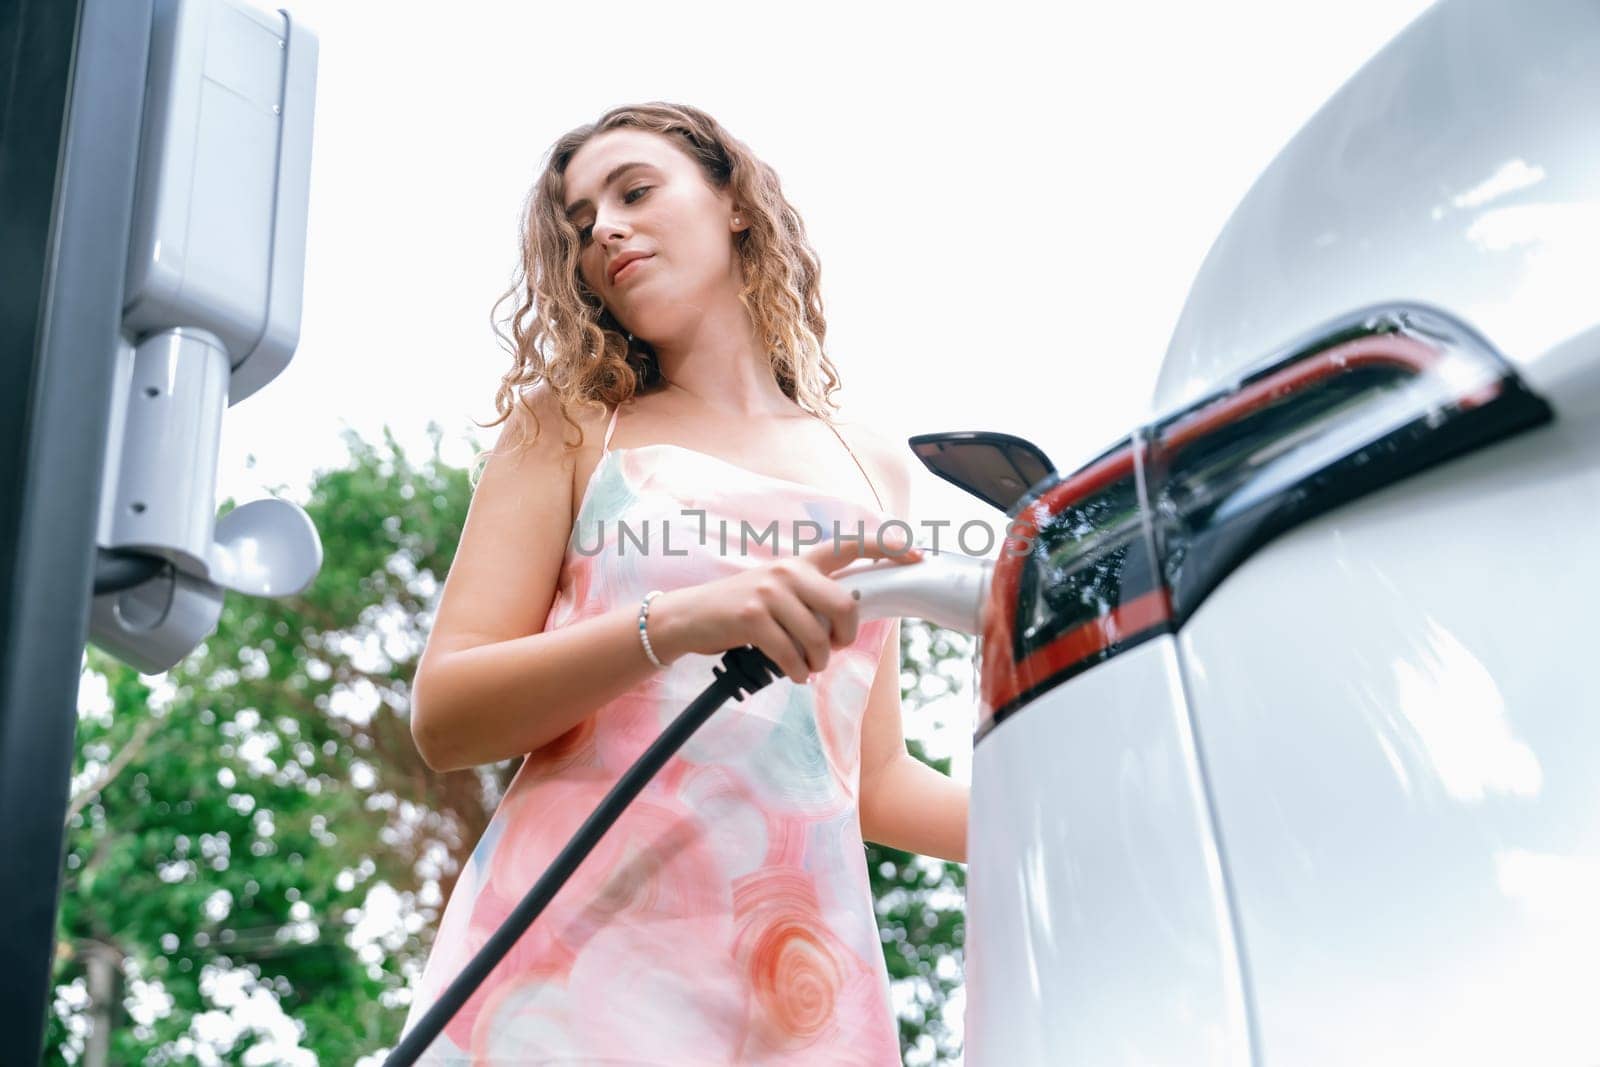 Eco-friendly conscious woman recharging modern electric vehicle from EV charging station. EV car technology utilized as alternative transportation for future sustainability. Synchronos